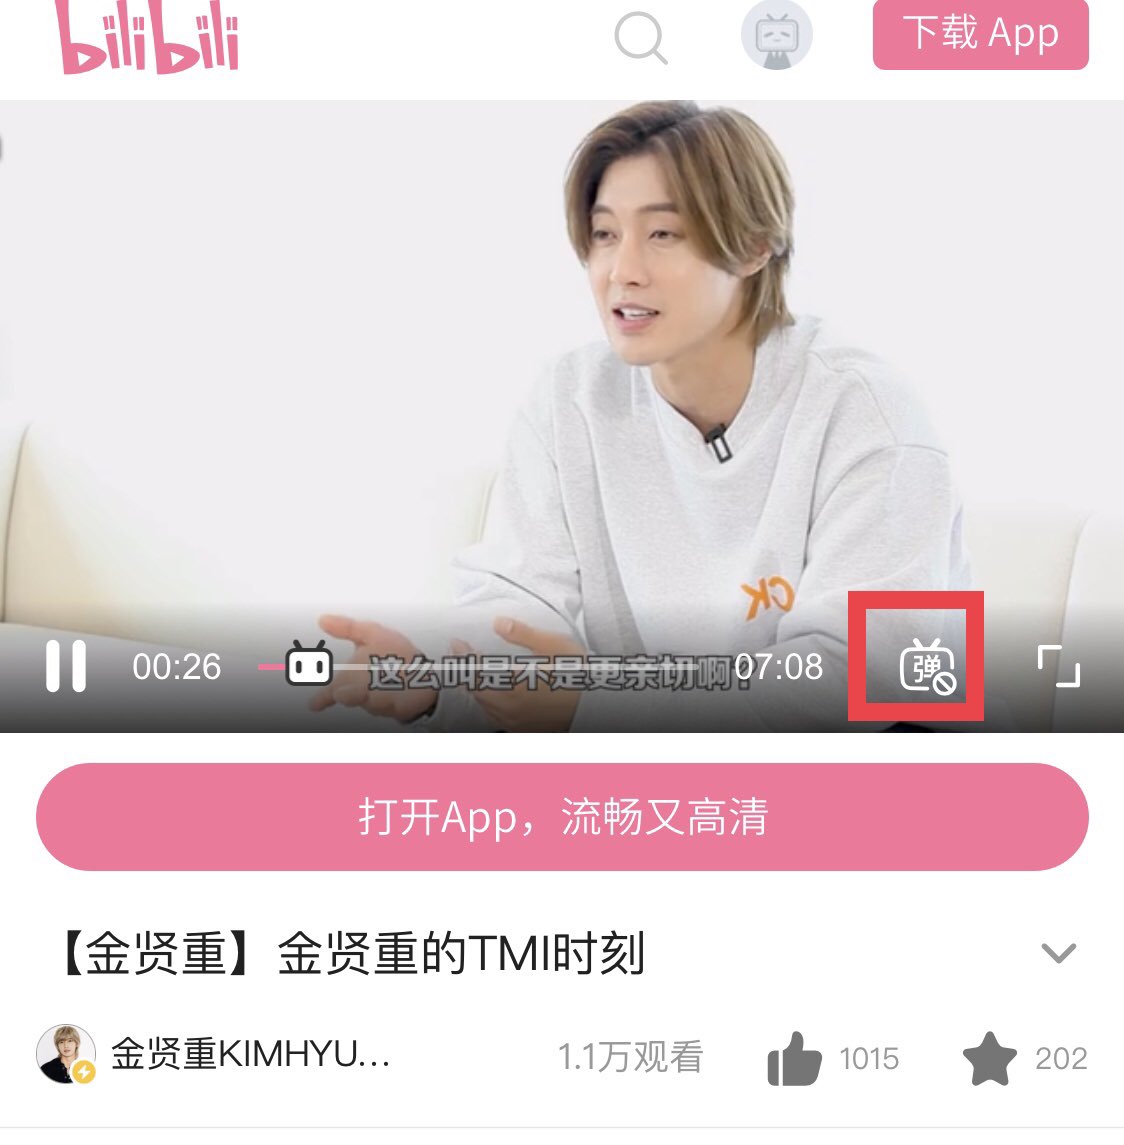 SP on X: "How to turn off the comments for Bili Bili videos! #BiliBili #김현중 https://t.co/mQWccBuXa5" / X